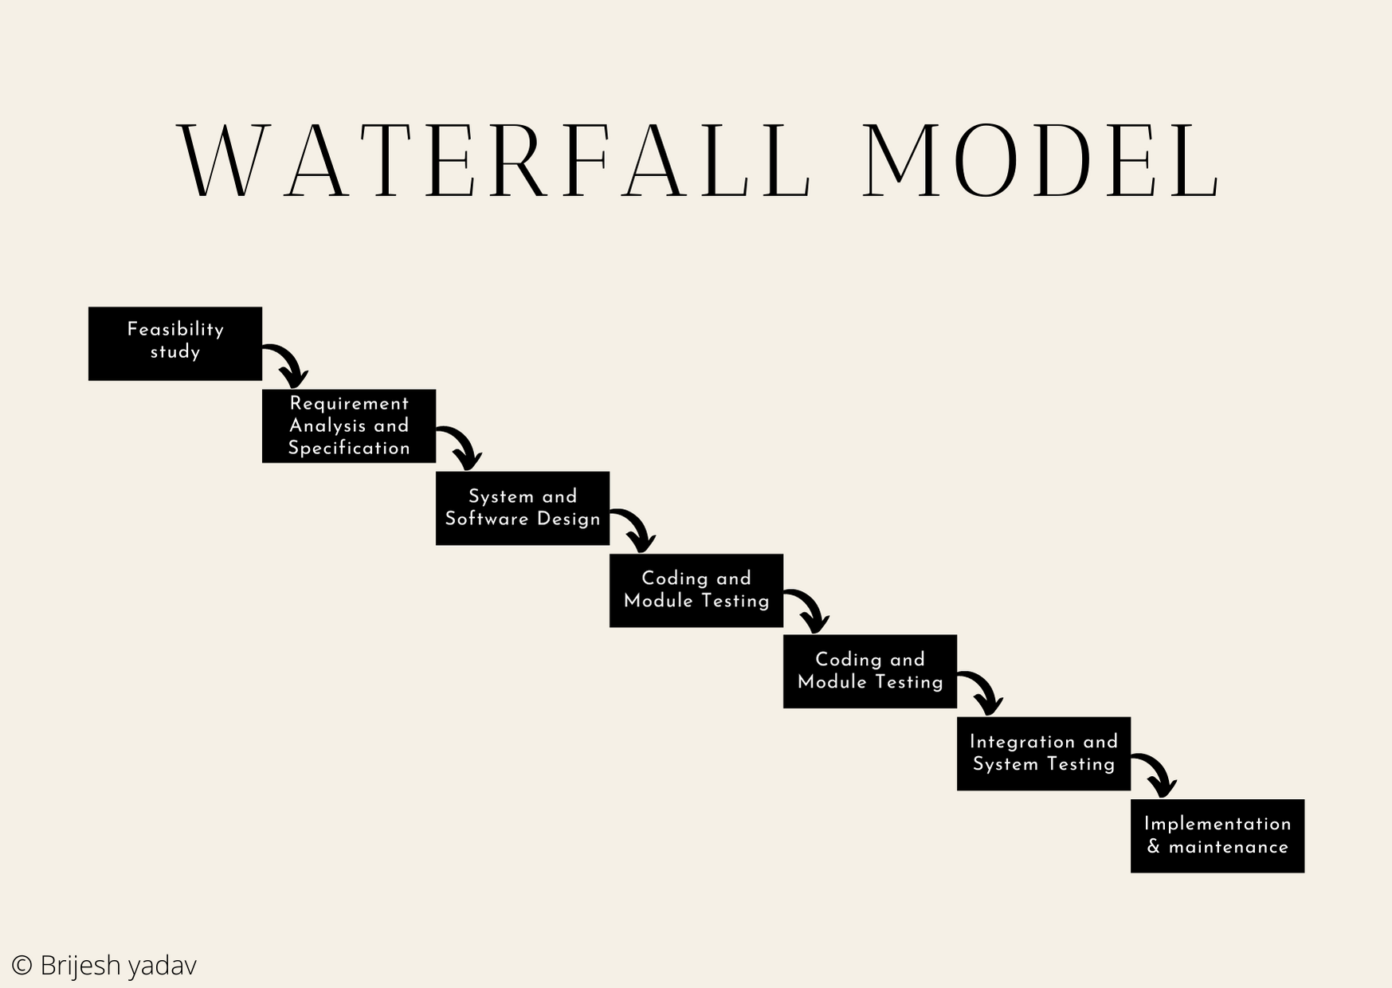 disadvantages of waterfall project management